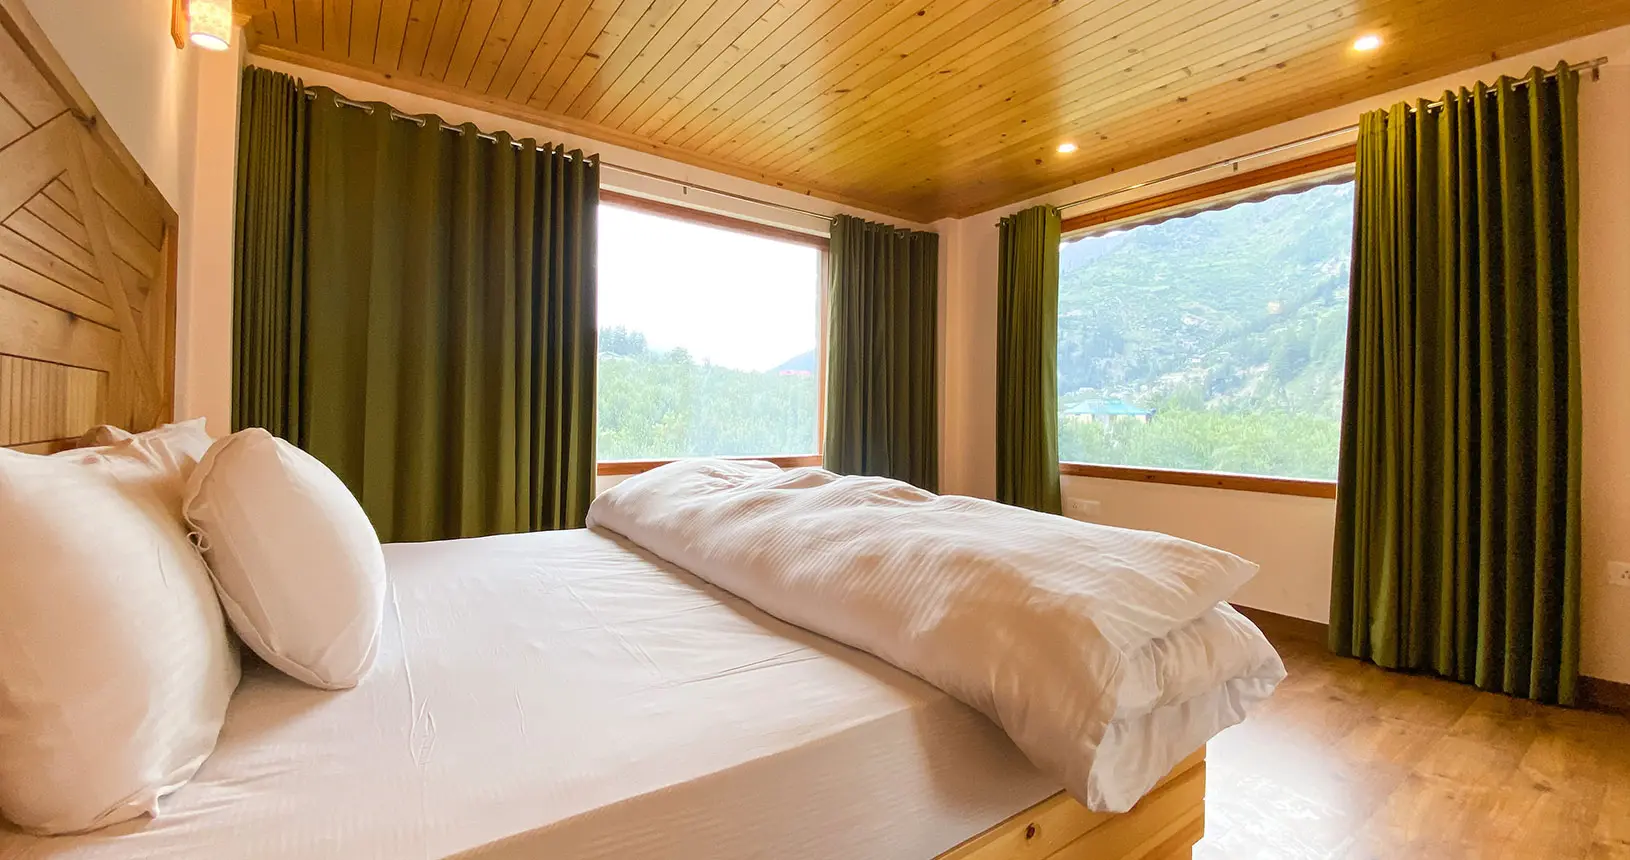 Bed and view from the family suite at Hotel Batseri, Sangla.